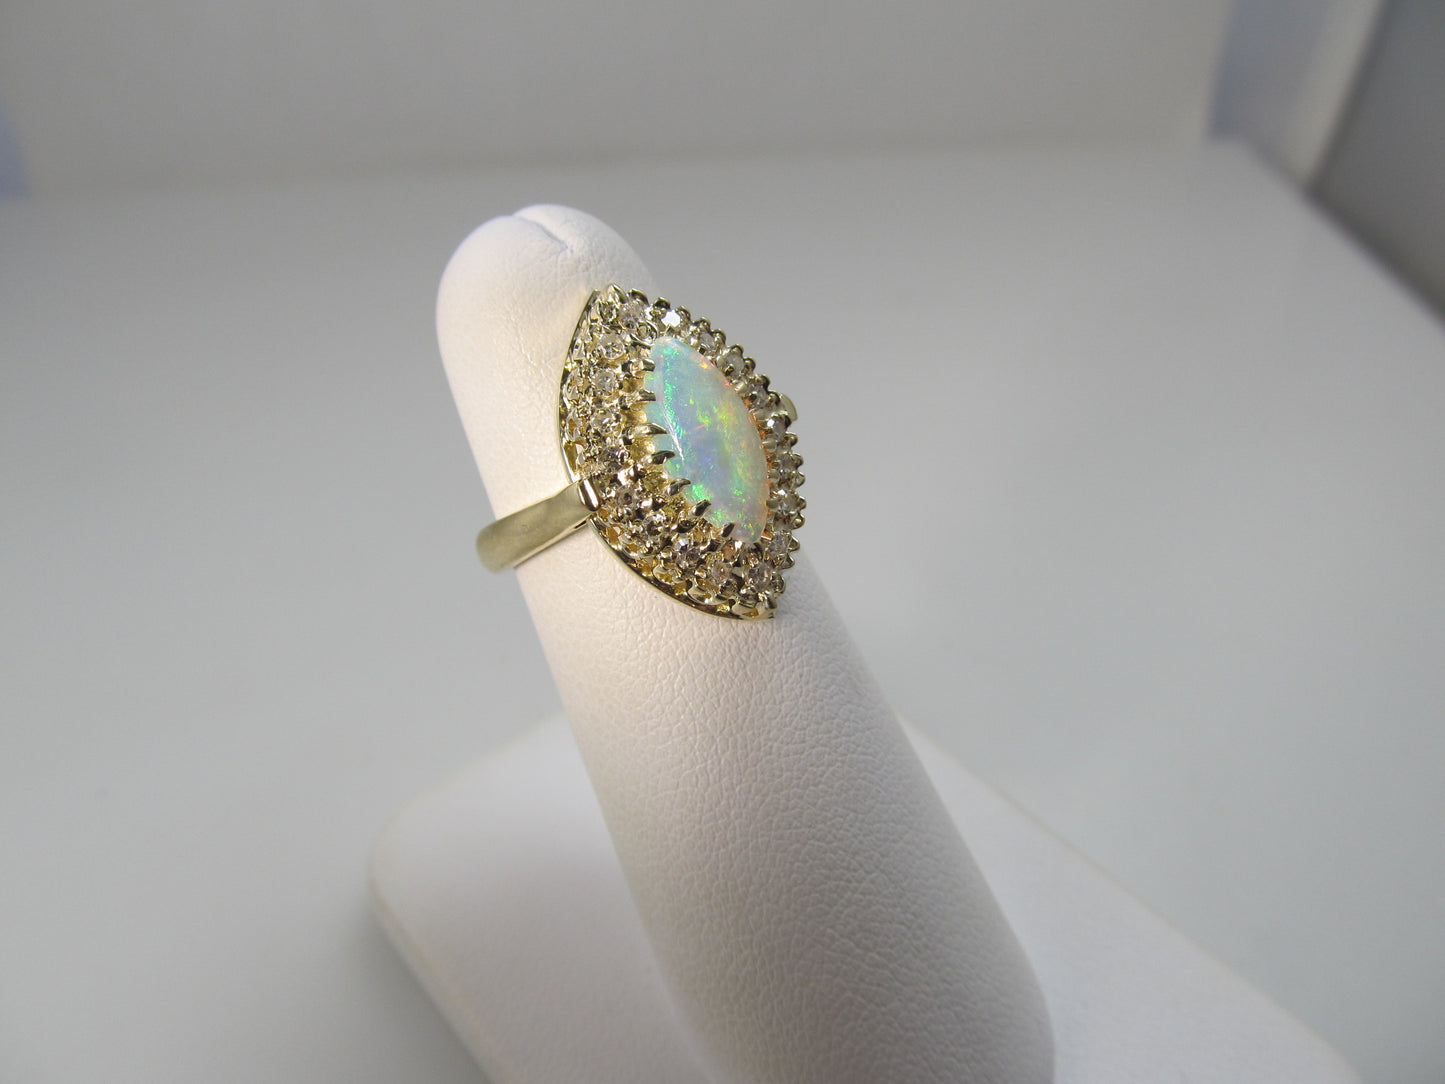 Vintage opal and diaomond marquise ring, 14k yellow gold